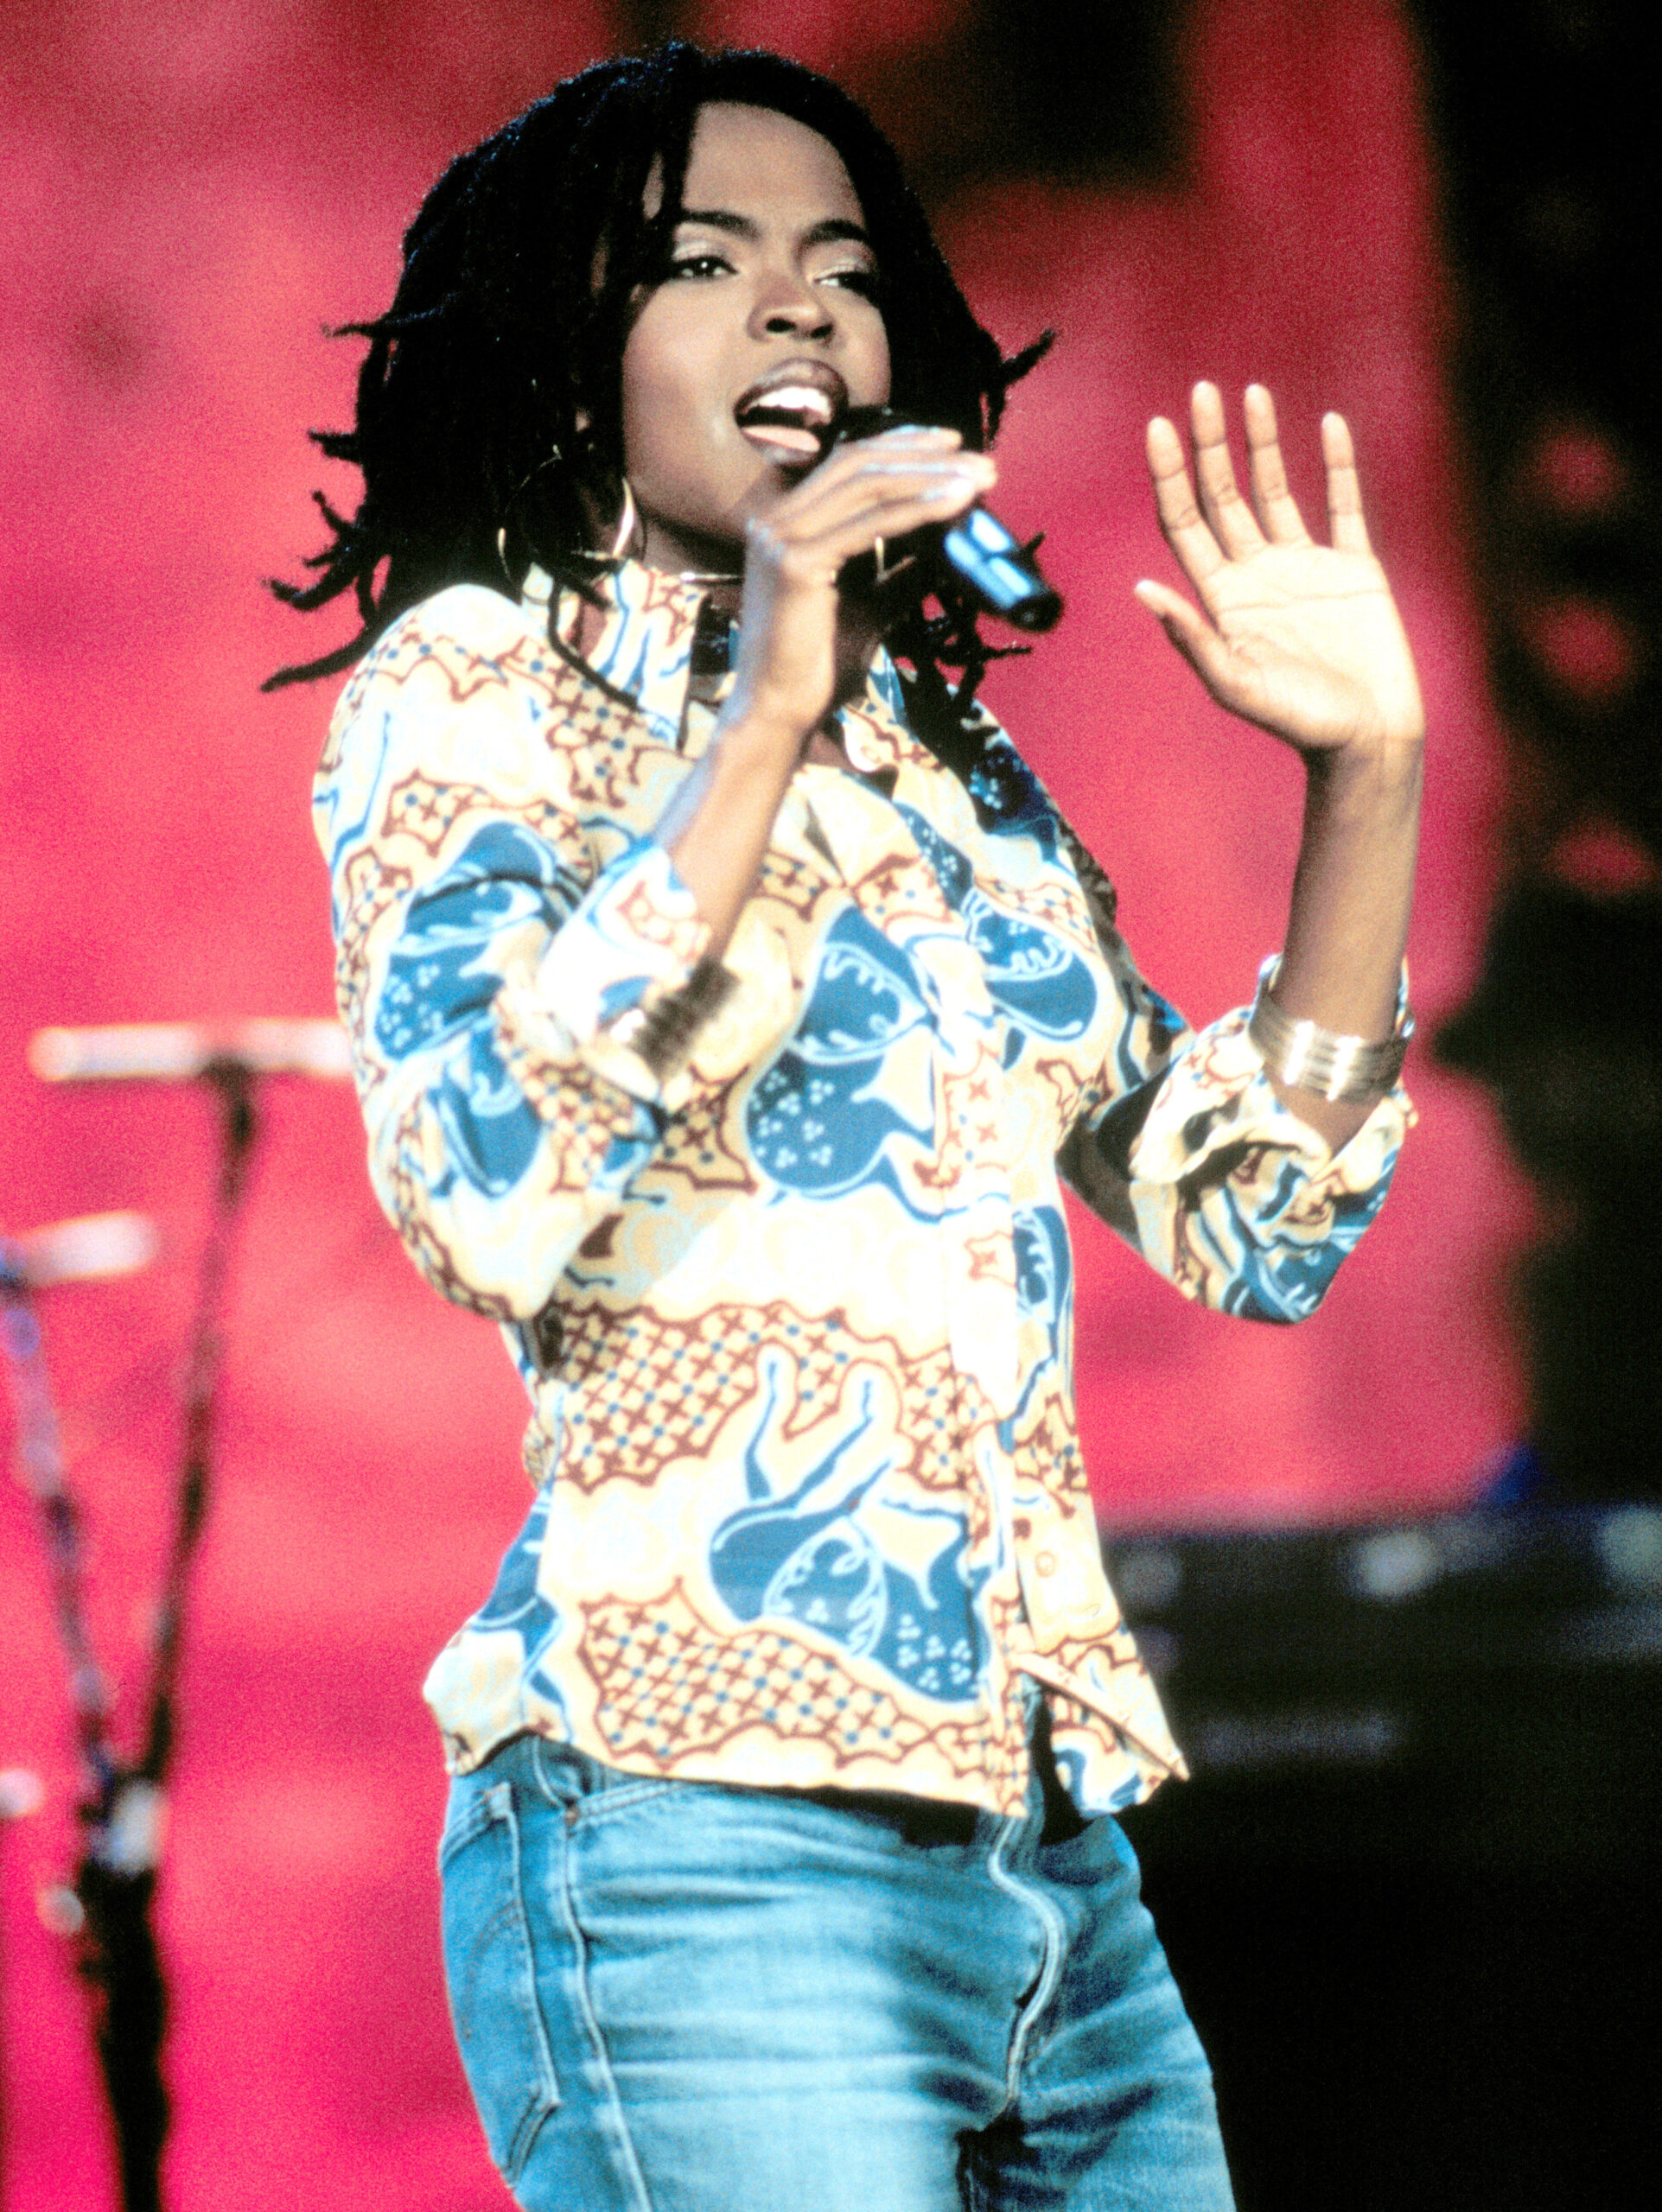 Former Fugees member Lauryn Hill